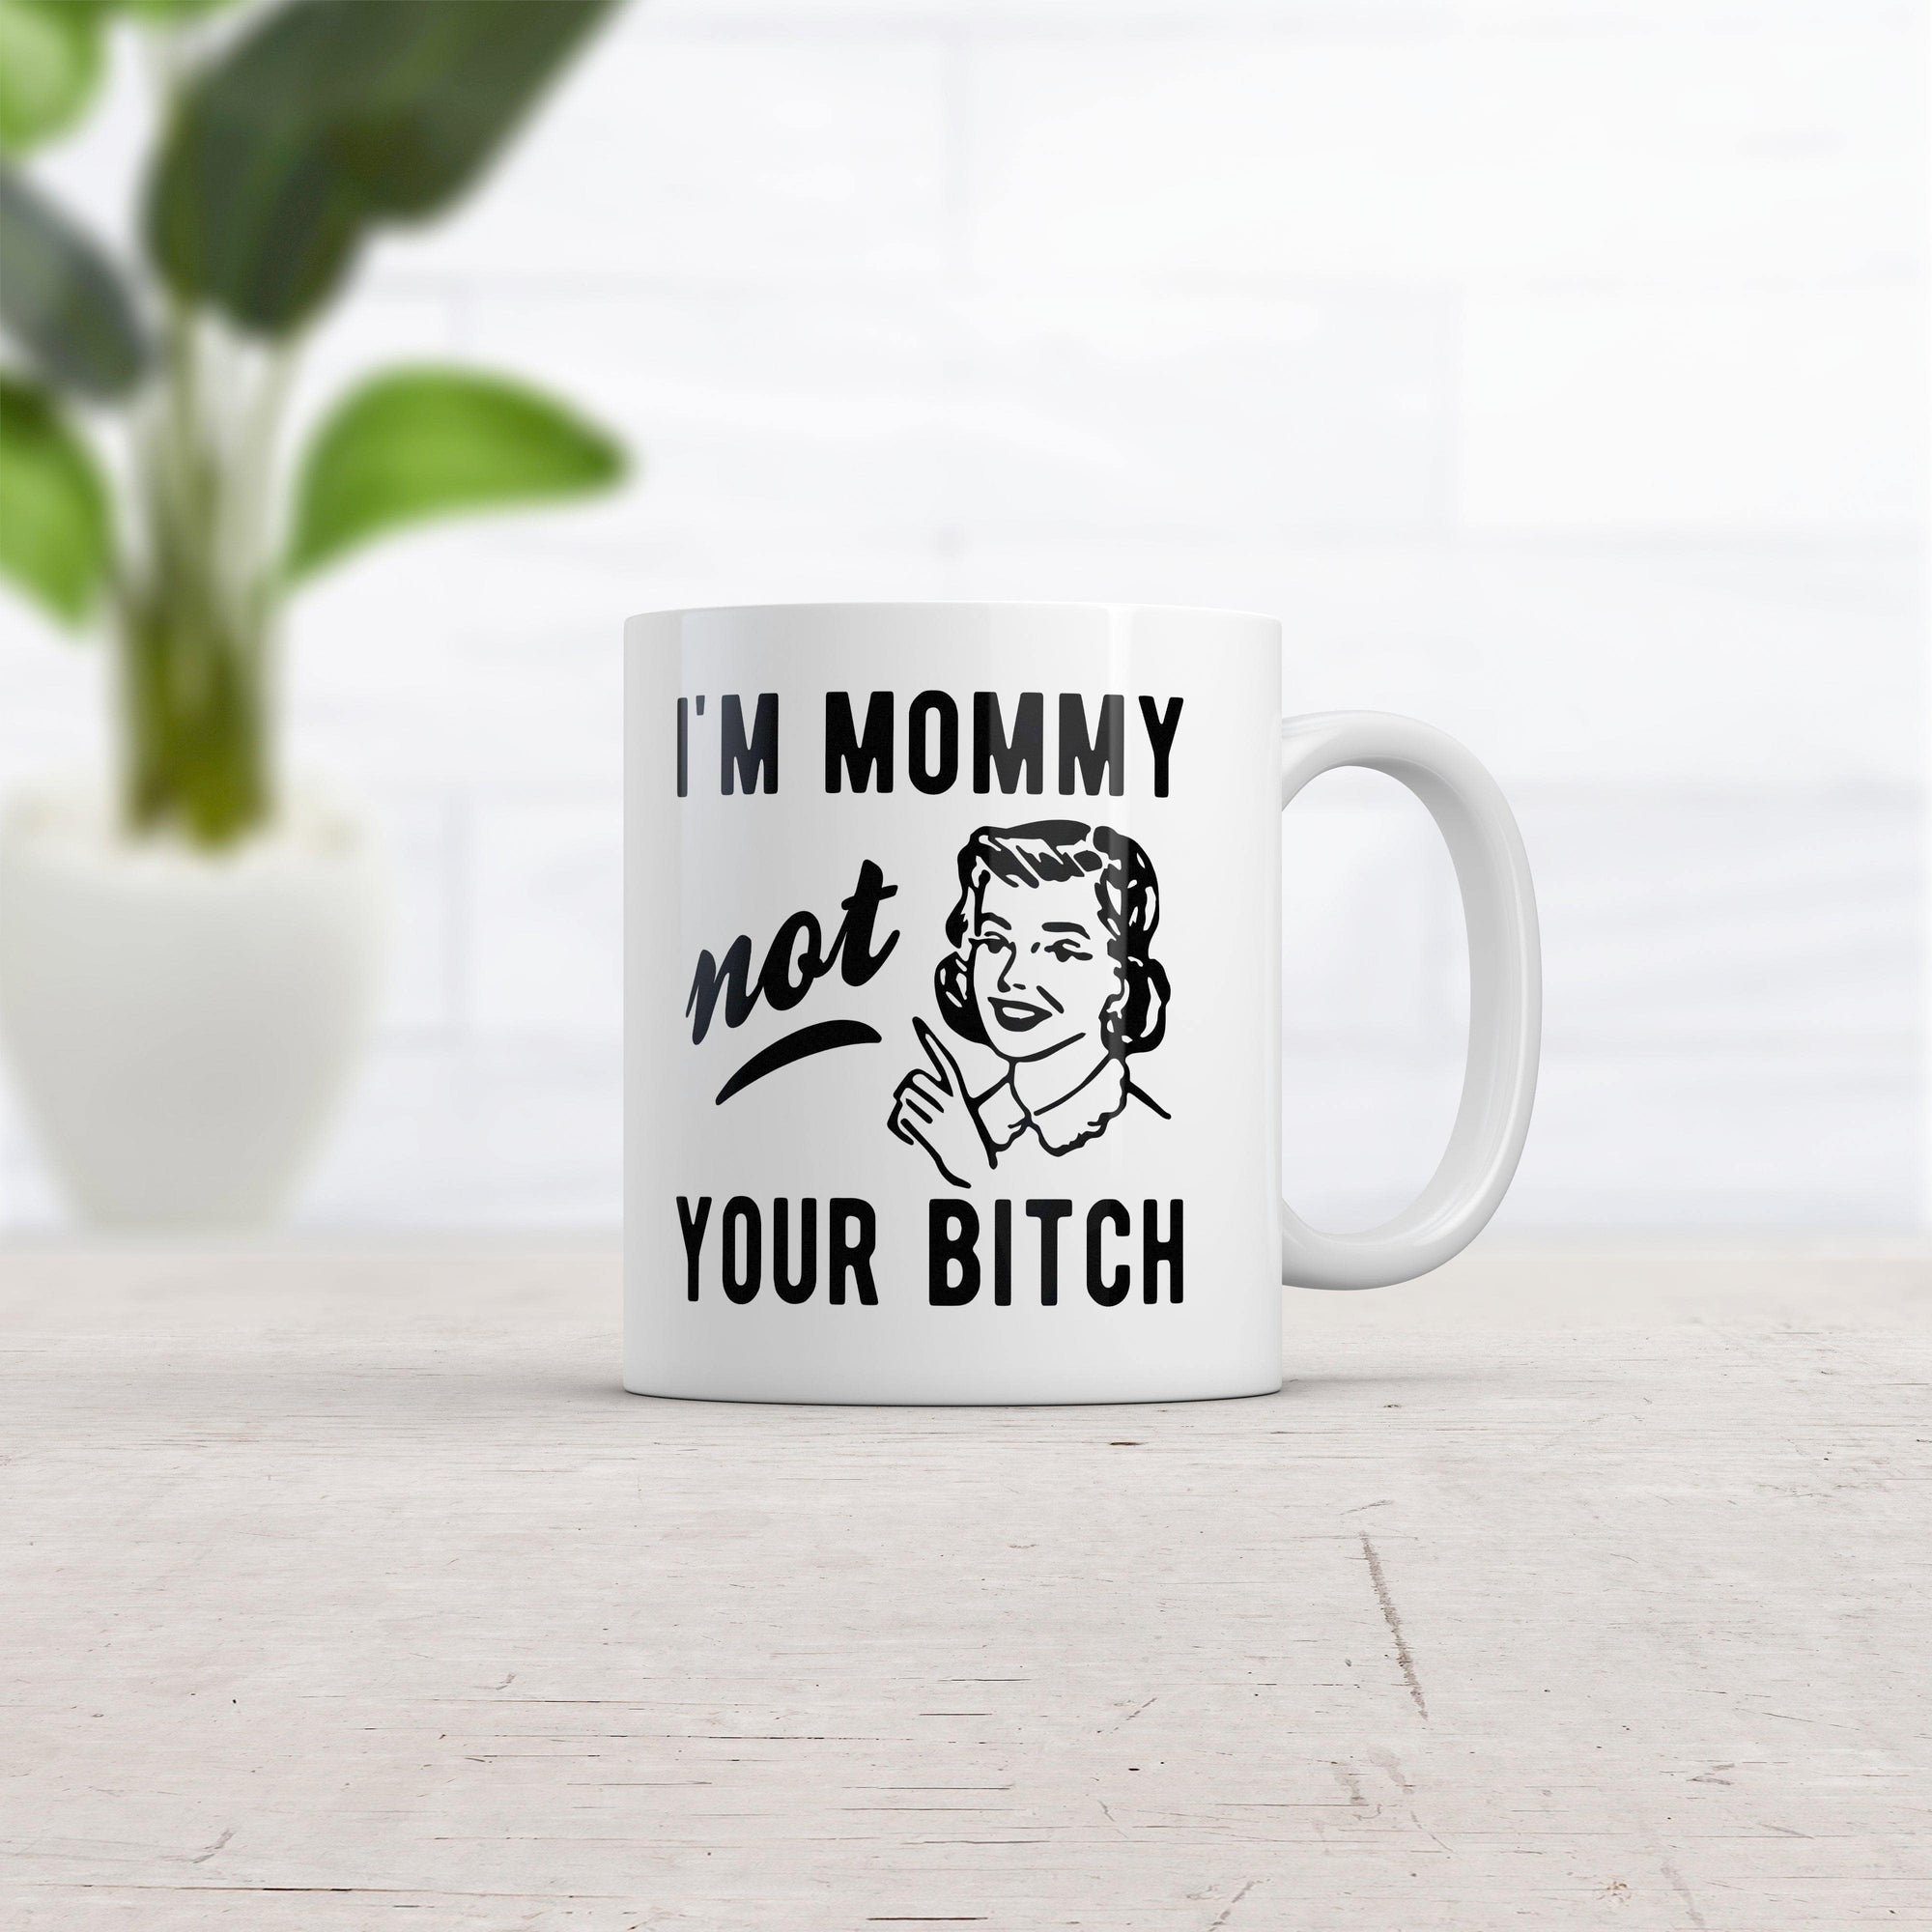 I'm Mommy Not Your Bitch Mug Funny Mother's Day Sarcastic Novelty Coffee Cup-11oz  -  Crazy Dog T-Shirts